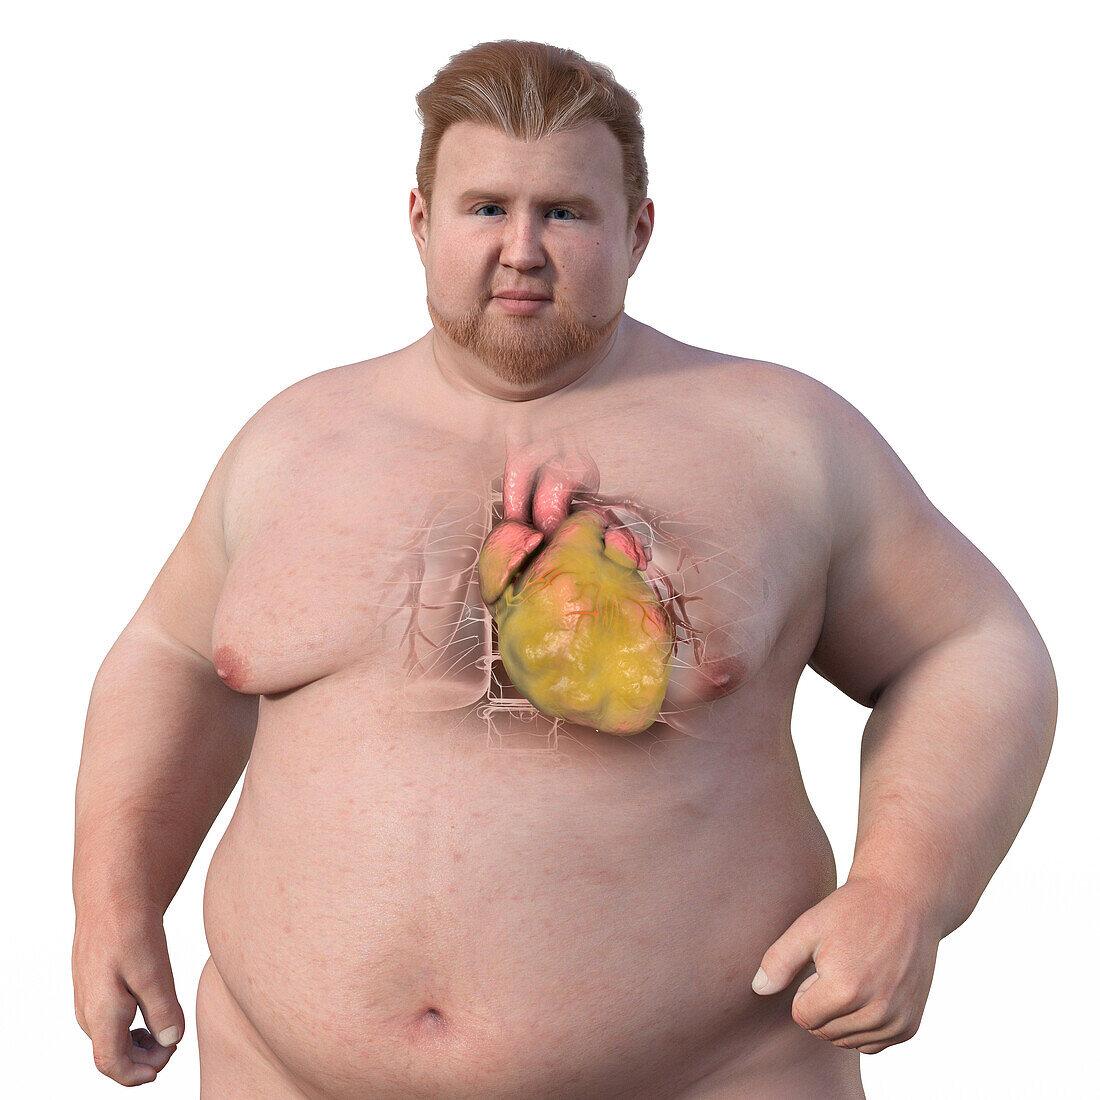 Overweight man with enlarged heart, illustration